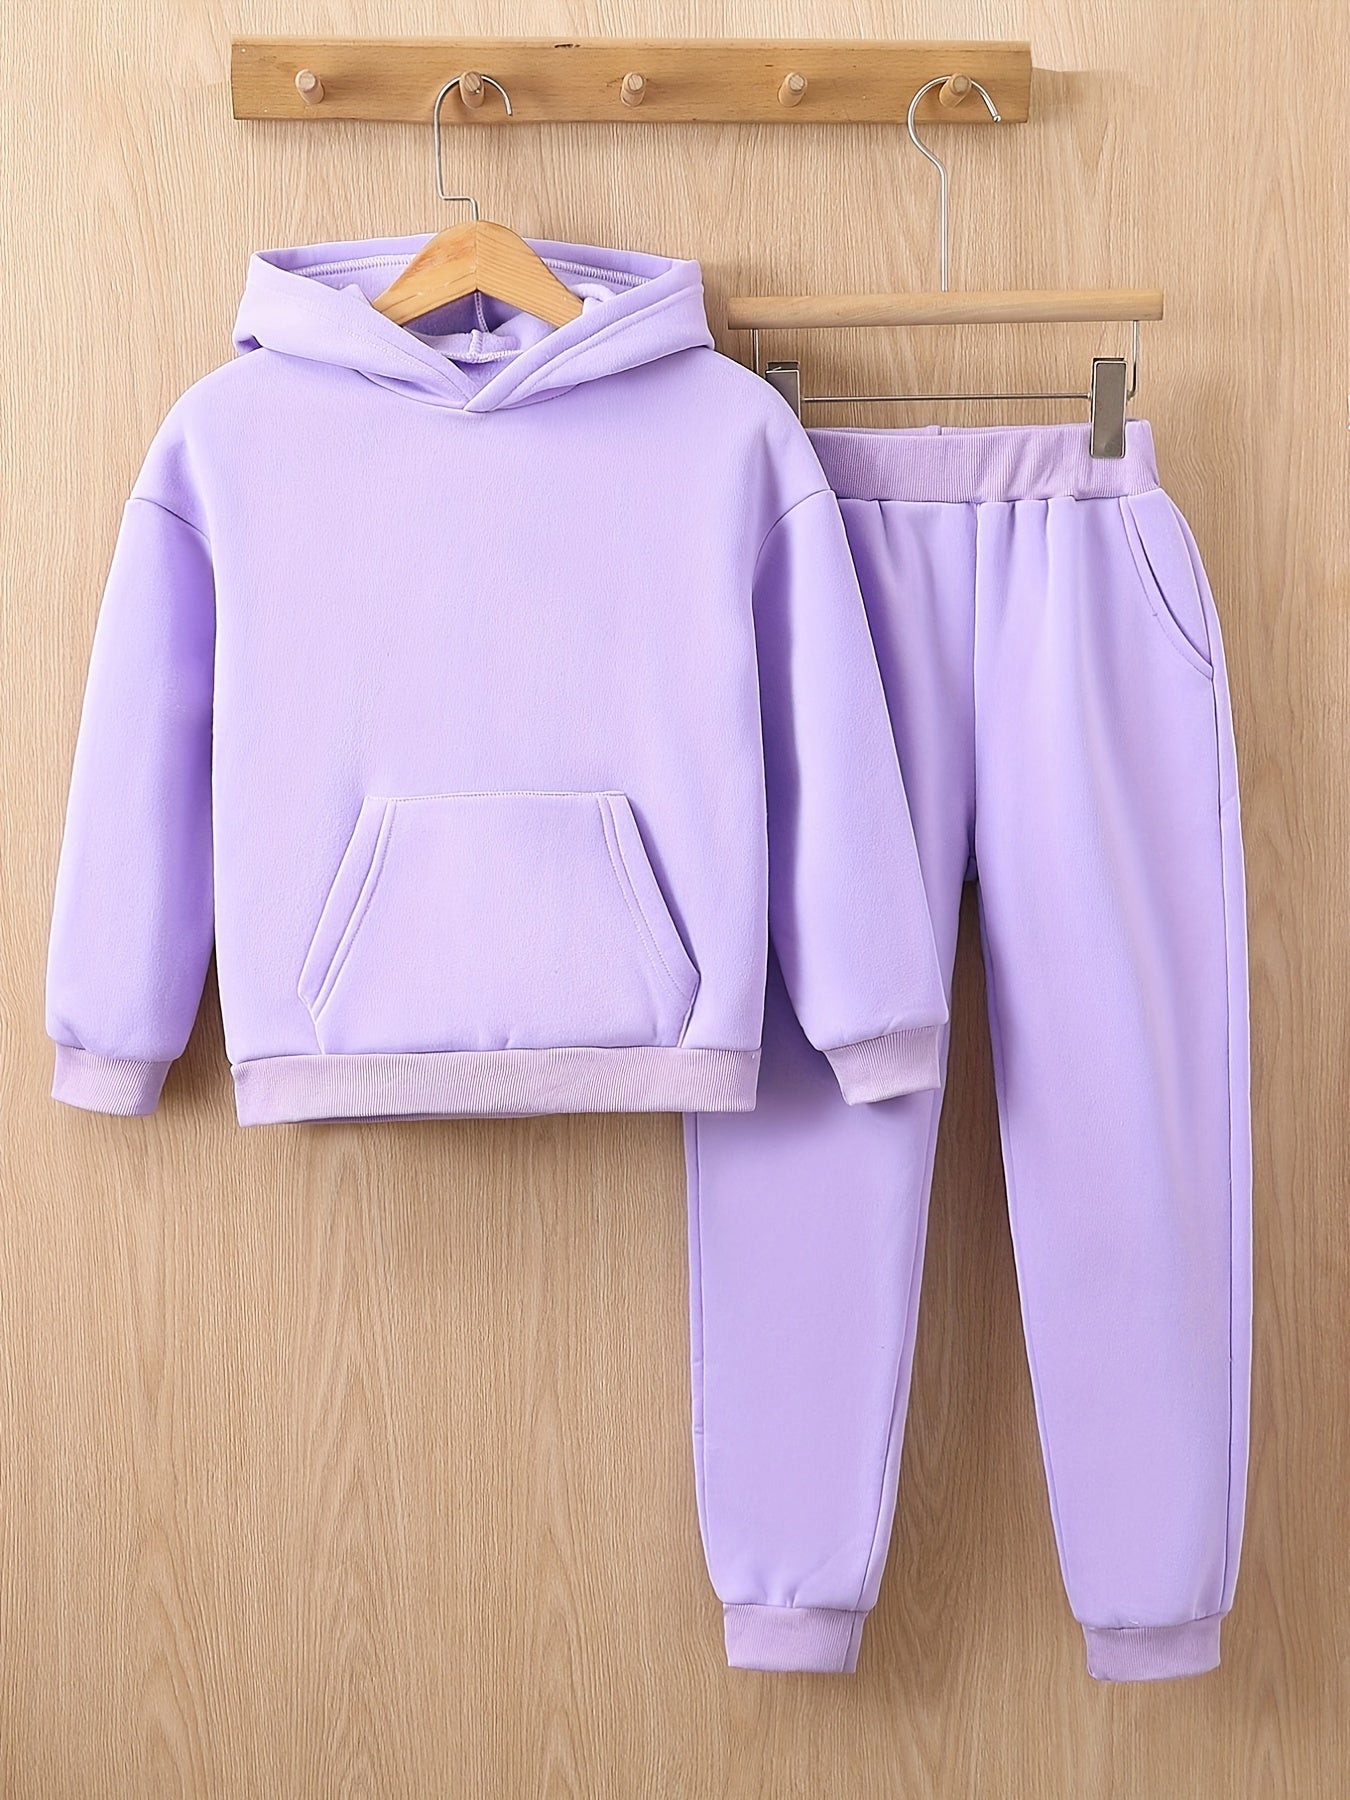 2Pcs Girls Fleece Thick Sports Hoodie And Pant Suit Casual Long Sleeve Hooded Sweatshirt Leggings Fall Outfits Sets For Autumn And Winter